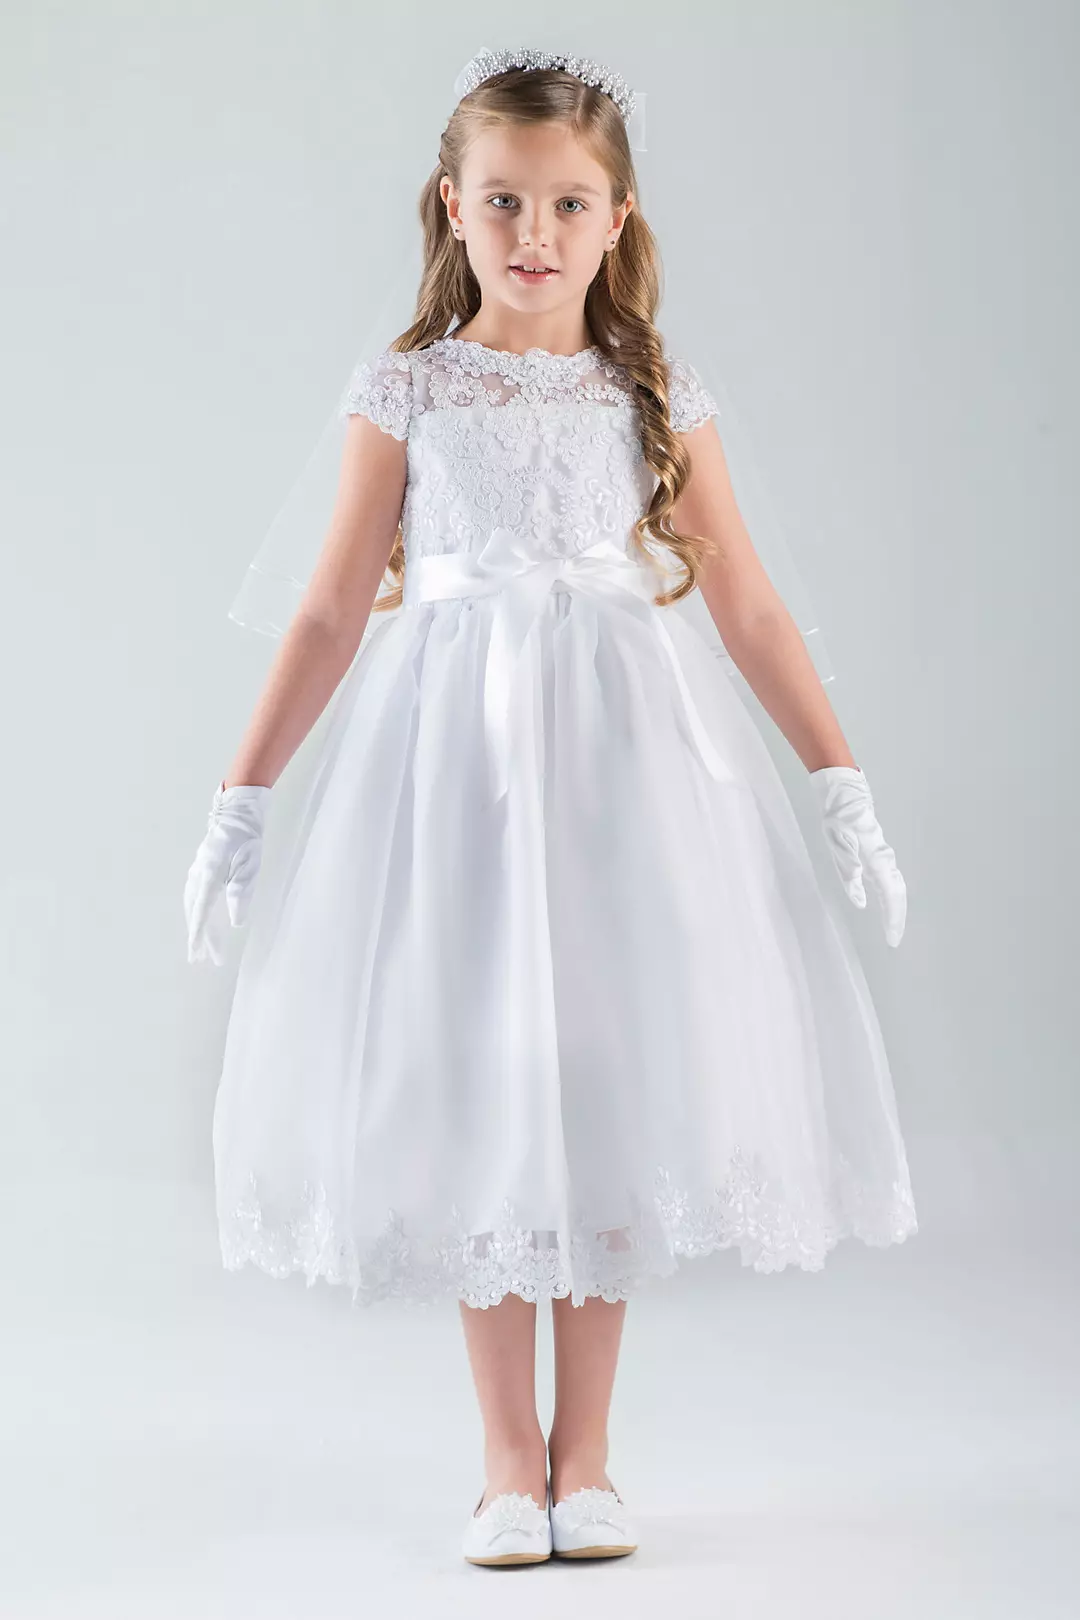 Lace Cap Sleeve Illusion Communion Dress with Bow Image